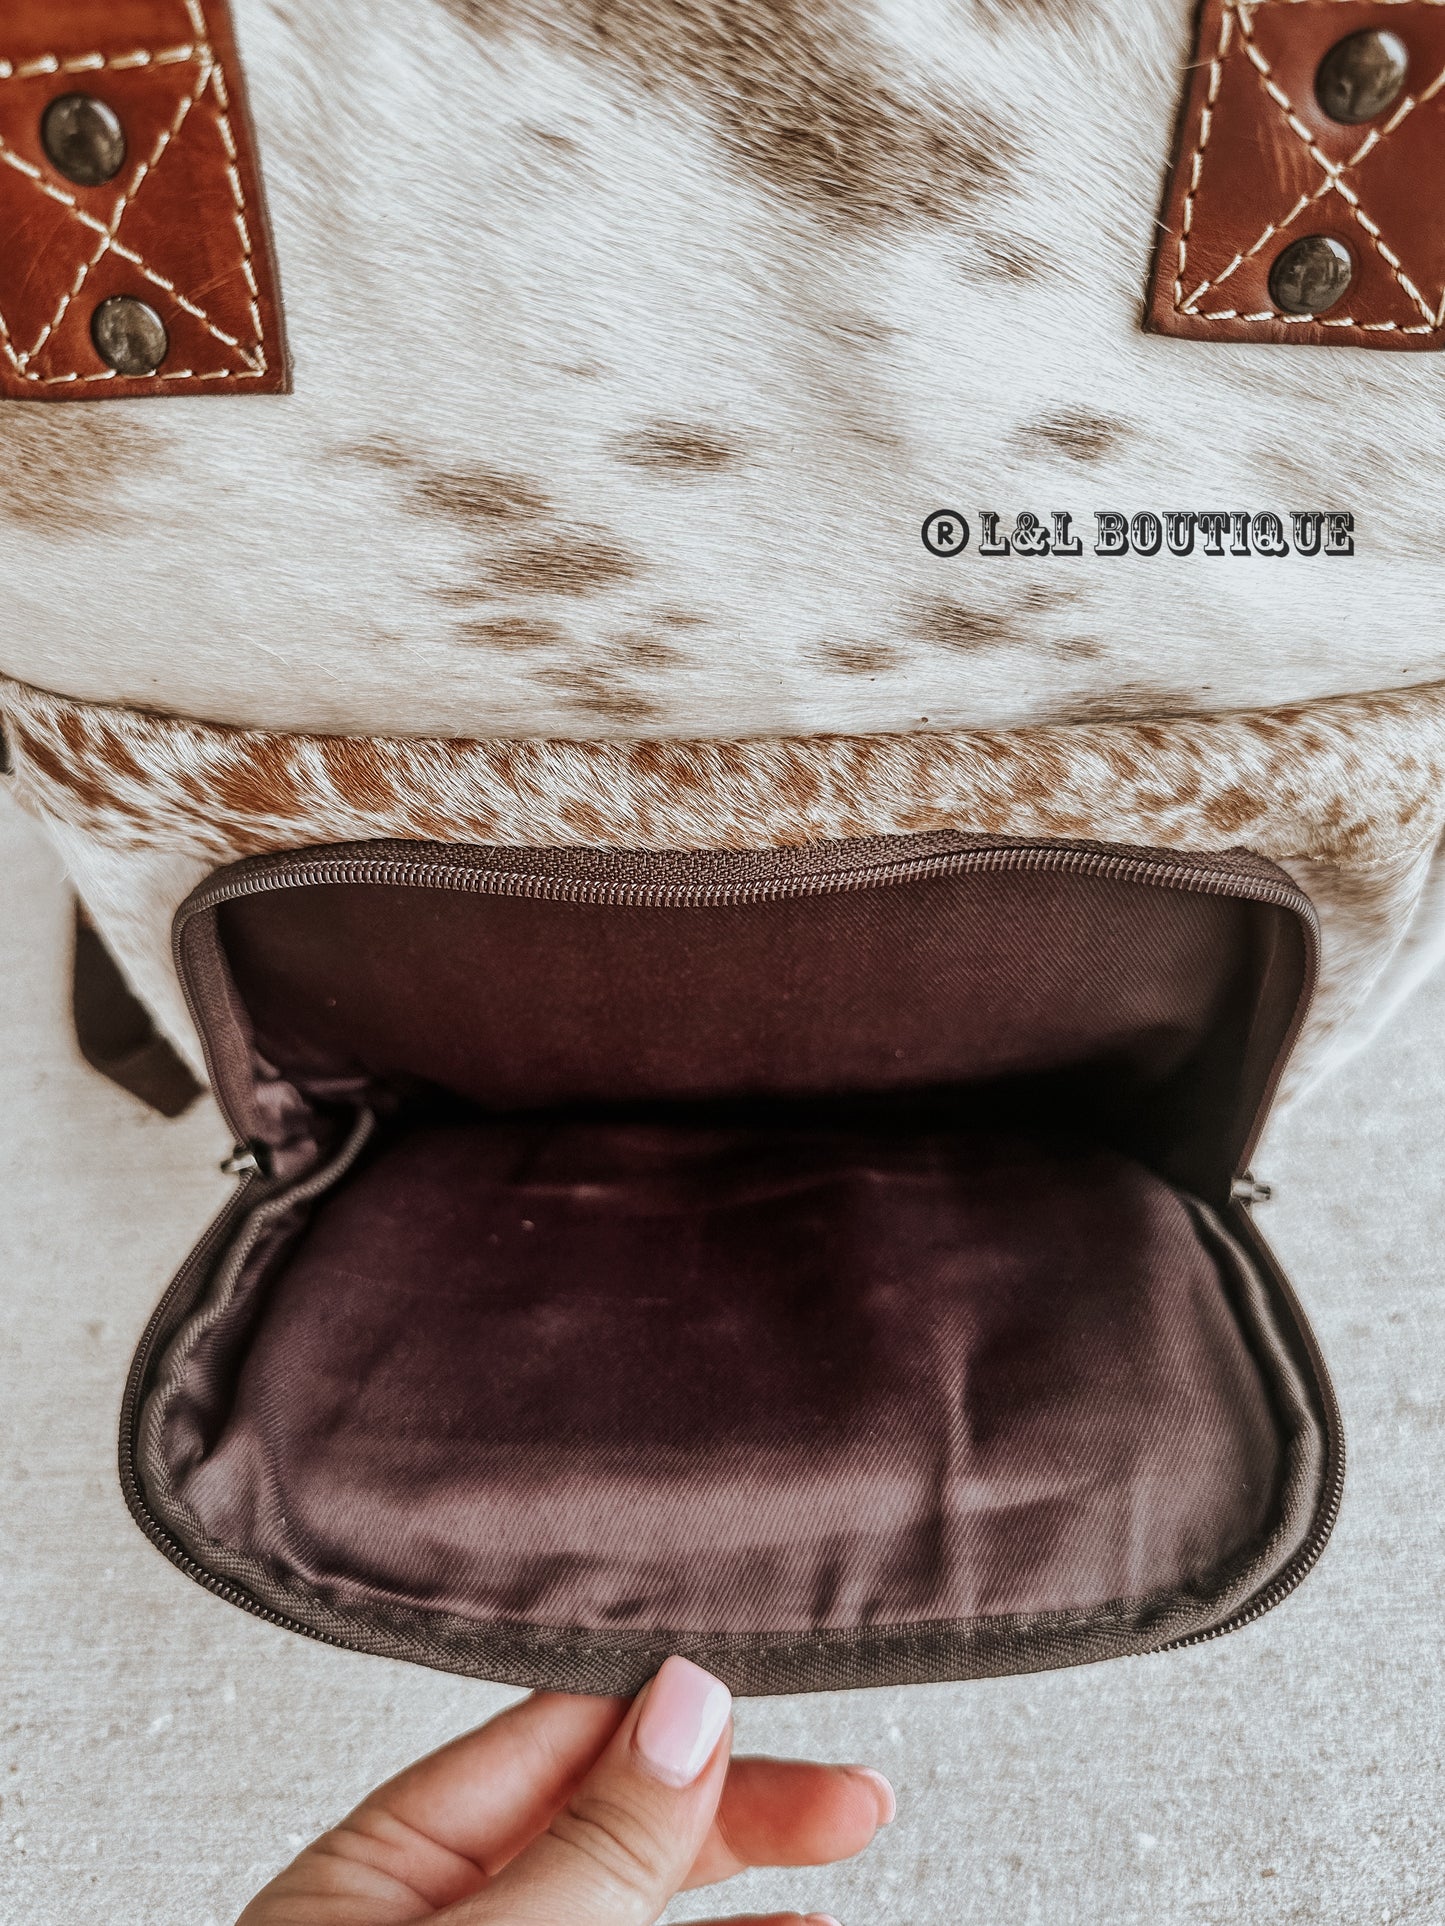 Sunflower Leather Cowhide Diaper Bag